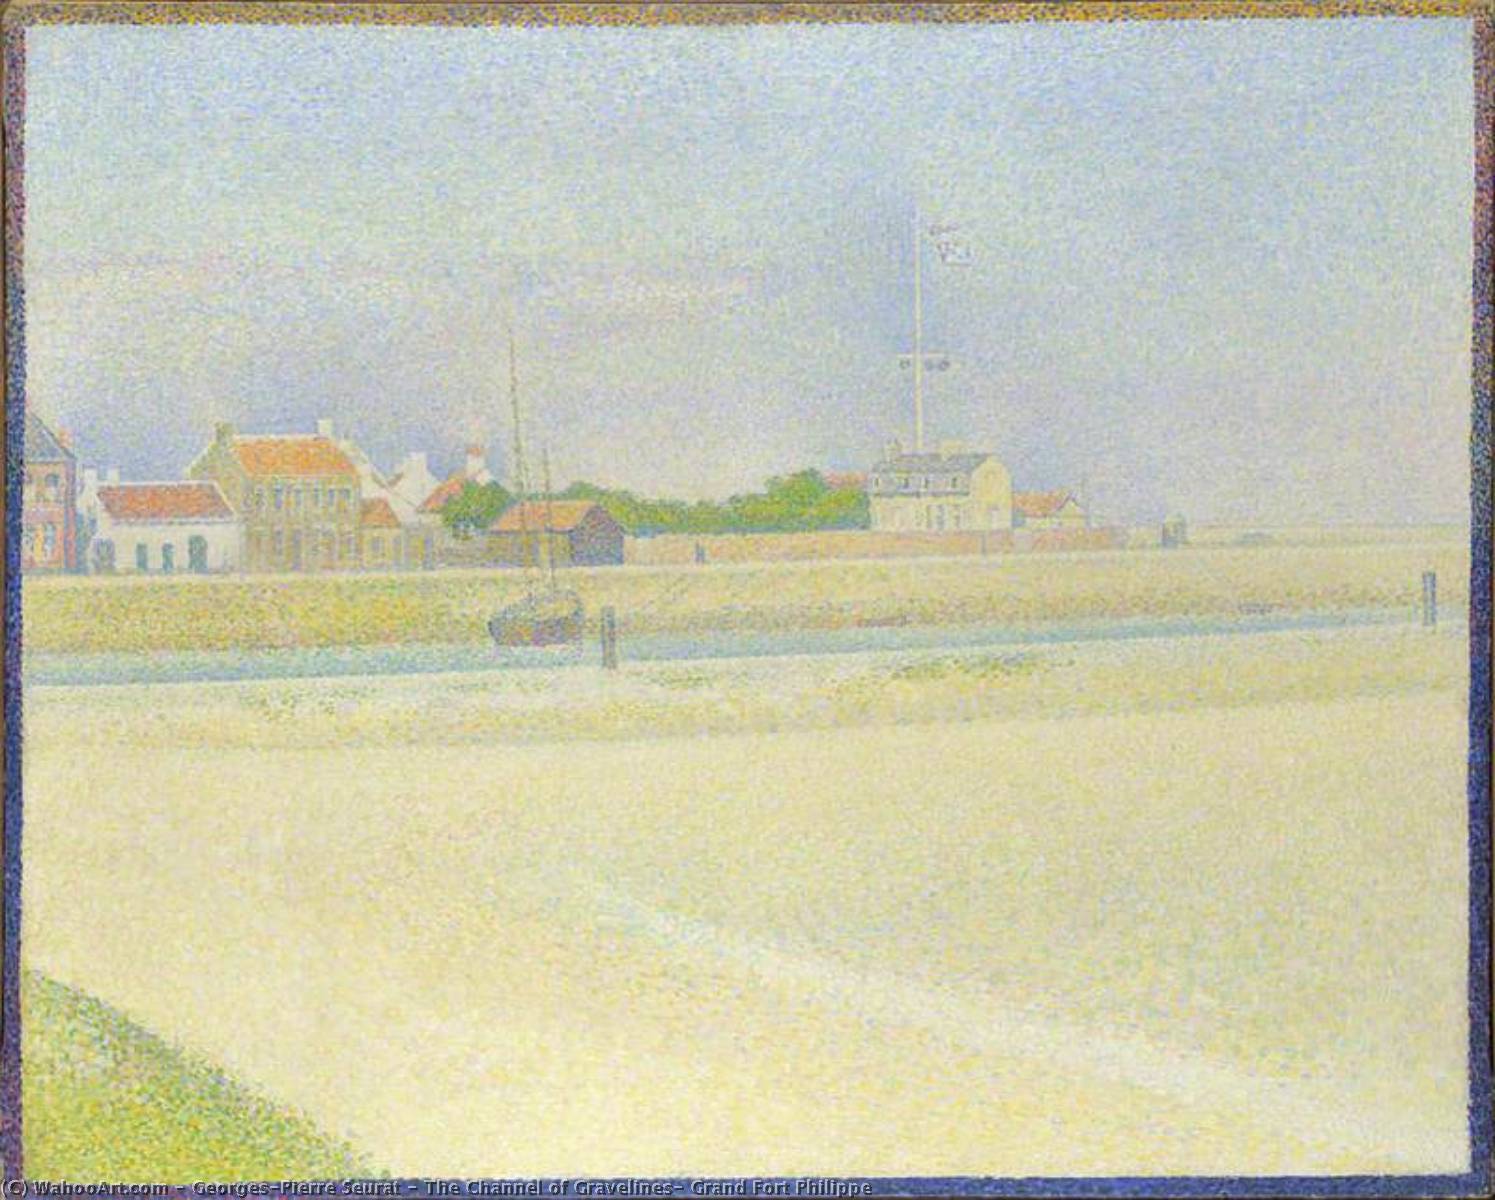 WikiOO.org - Encyclopedia of Fine Arts - Malba, Artwork Georges Pierre Seurat - The Channel of Gravelines, Grand Fort Philippe